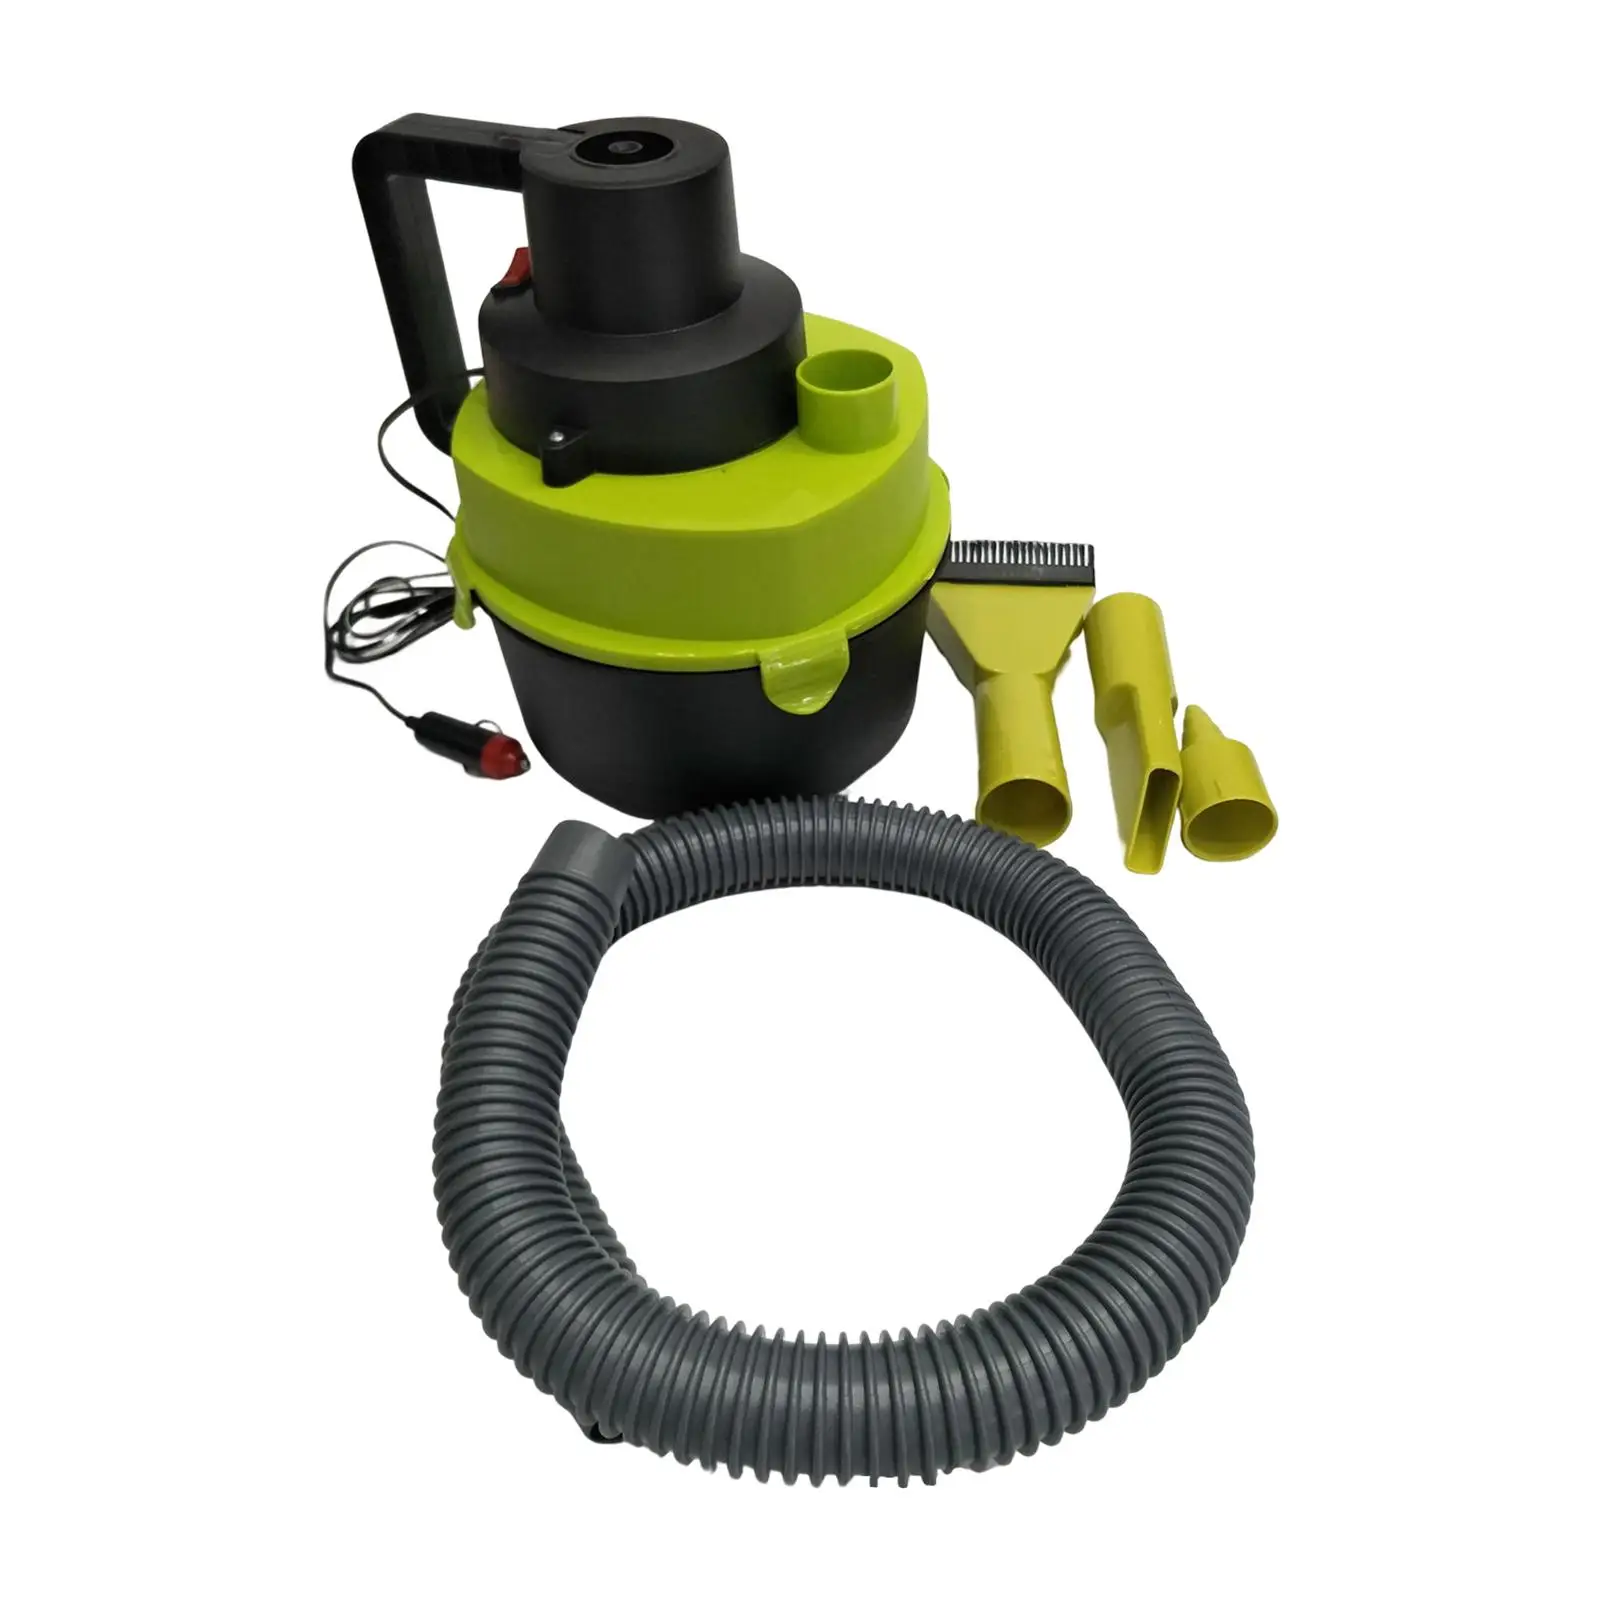 Portable Shop Vacuum with Attachments 4L Dry Garbage Multifunctional Car Vacuum for Basement Corners Cars Garage Window Seams